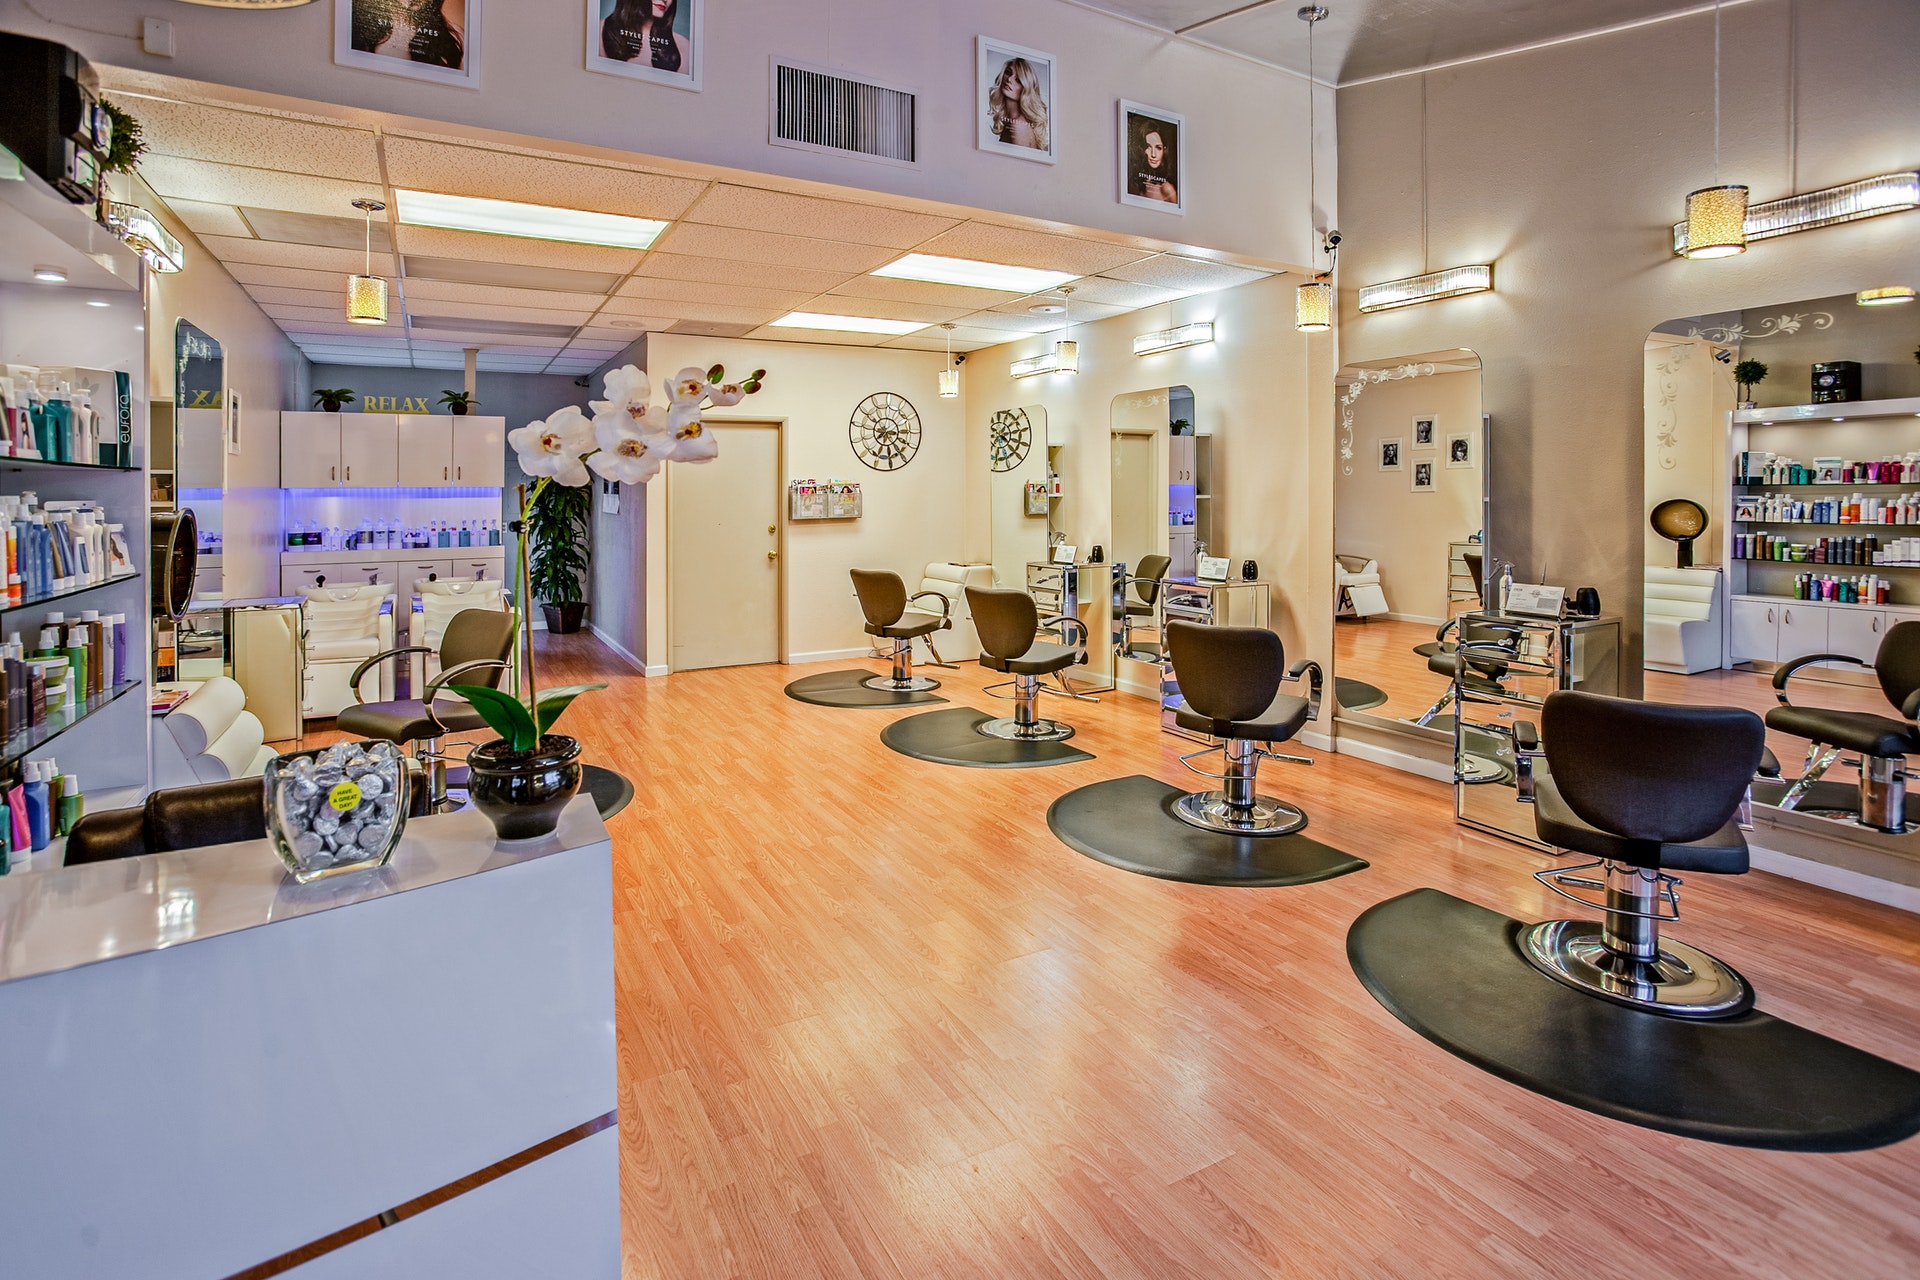 a view of an interior area of a salon with front desk and salon chairs